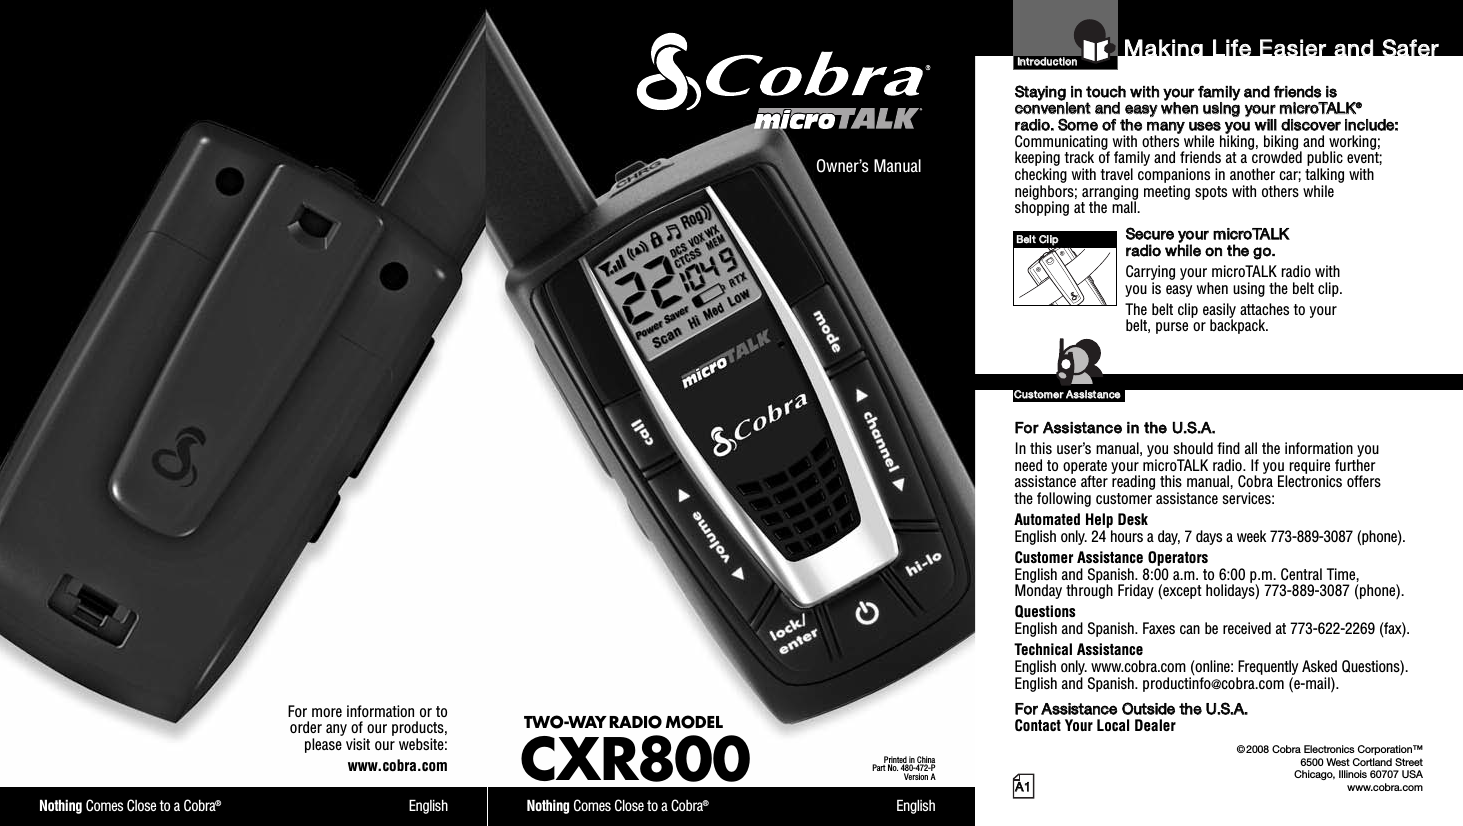 Nothing Comes Close to a Cobra®EnglishFor more information or toorder any of our products,please visit our website:www.cobra.comAA11MMaakkiinngg  LLiiffee  EEaassiieerr  aanndd  SSaaffeerrOwner’s ManualNothing Comes Close to a Cobra®EnglishTWO-WAY RADIO MODEL CXR800Printed in ChinaPart No. 480-472-PVersion AIInnttrroodduuccttiioonnSSttaayyiinngg  iinn  ttoouucchh  wwiitthh  yyoouurr  ffaammiillyy  aanndd  ffrriieennddss  iiss  ccoonnvveenniieenntt  aanndd  eeaassyy  wwhheenn  uussiinngg  yyoouurr  mmiiccrrooTTAALLKK®®rraaddiioo..  SSoommee  ooff  tthhee  mmaannyy  uusseess  yyoouu  wwiillll  ddiissccoovveerr  iinncclluuddee::Communicating with others while hiking, biking and working;keeping track of family and friends at a crowded public event;checking with travel companions in another car; talking withneighbors; arranging meeting spots with others while shopping at the mall.SSeeccuurree  yyoouurr  mmiiccrrooTTAALLKK  rraaddiioo  wwhhiillee  oonn  tthhee  ggoo..Carrying your microTALK radio with you is easy when using the belt clip. The belt clip easily attaches to your belt, purse or backpack.FFoorr  AAssssiissttaannccee  iinn  tthhee  UU..SS..AA..  In this user’s manual, you should find all the information you need to operate your microTALK radio. If you require furtherassistance after reading this manual, Cobra Electronics offers the following customer assistance services:Automated Help Desk English only. 24 hours a day, 7 days a week 773-889-3087 (phone). Customer Assistance OperatorsEnglish and Spanish. 8:00 a.m. to 6:00 p.m. Central Time, Monday through Friday (except holidays) 773-889-3087 (phone). QuestionsEnglish and Spanish. Faxes can be received at 773-622-2269 (fax). Technical AssistanceEnglish only. www.cobra.com (online: Frequently Asked Questions). English and Spanish. productinfo@cobra.com (e-mail).FFoorr  AAssssiissttaannccee  OOuuttssiiddee  tthhee  UU..SS..AA..  Contact Your Local Dealer©2008 Cobra Electronics Corporation™6500 West Cortland StreetChicago, Illinois 60707 USAwww.cobra.comCCuussttoommeerr  AAssssiissttaanncceeBBeelltt  CClliipp